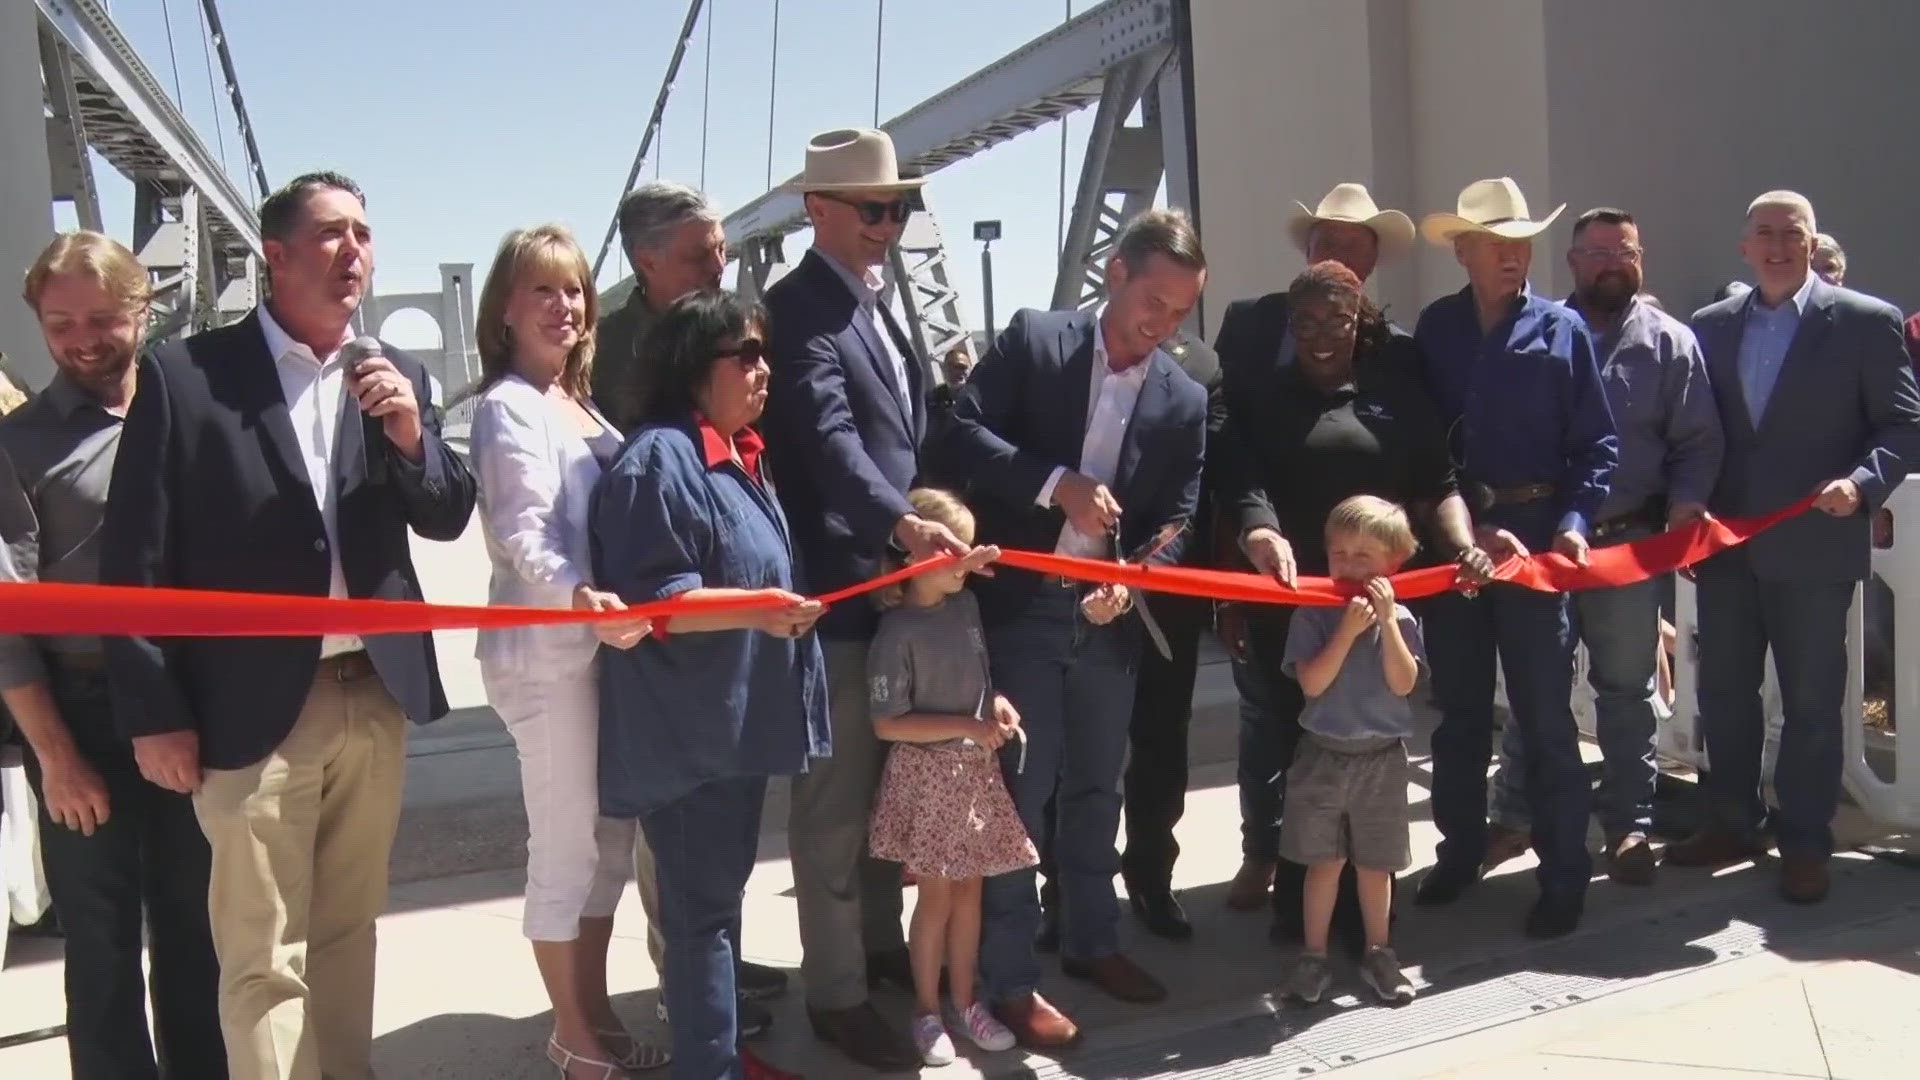 Residents were able to walk across the historic bridge for the first time since renovations started.